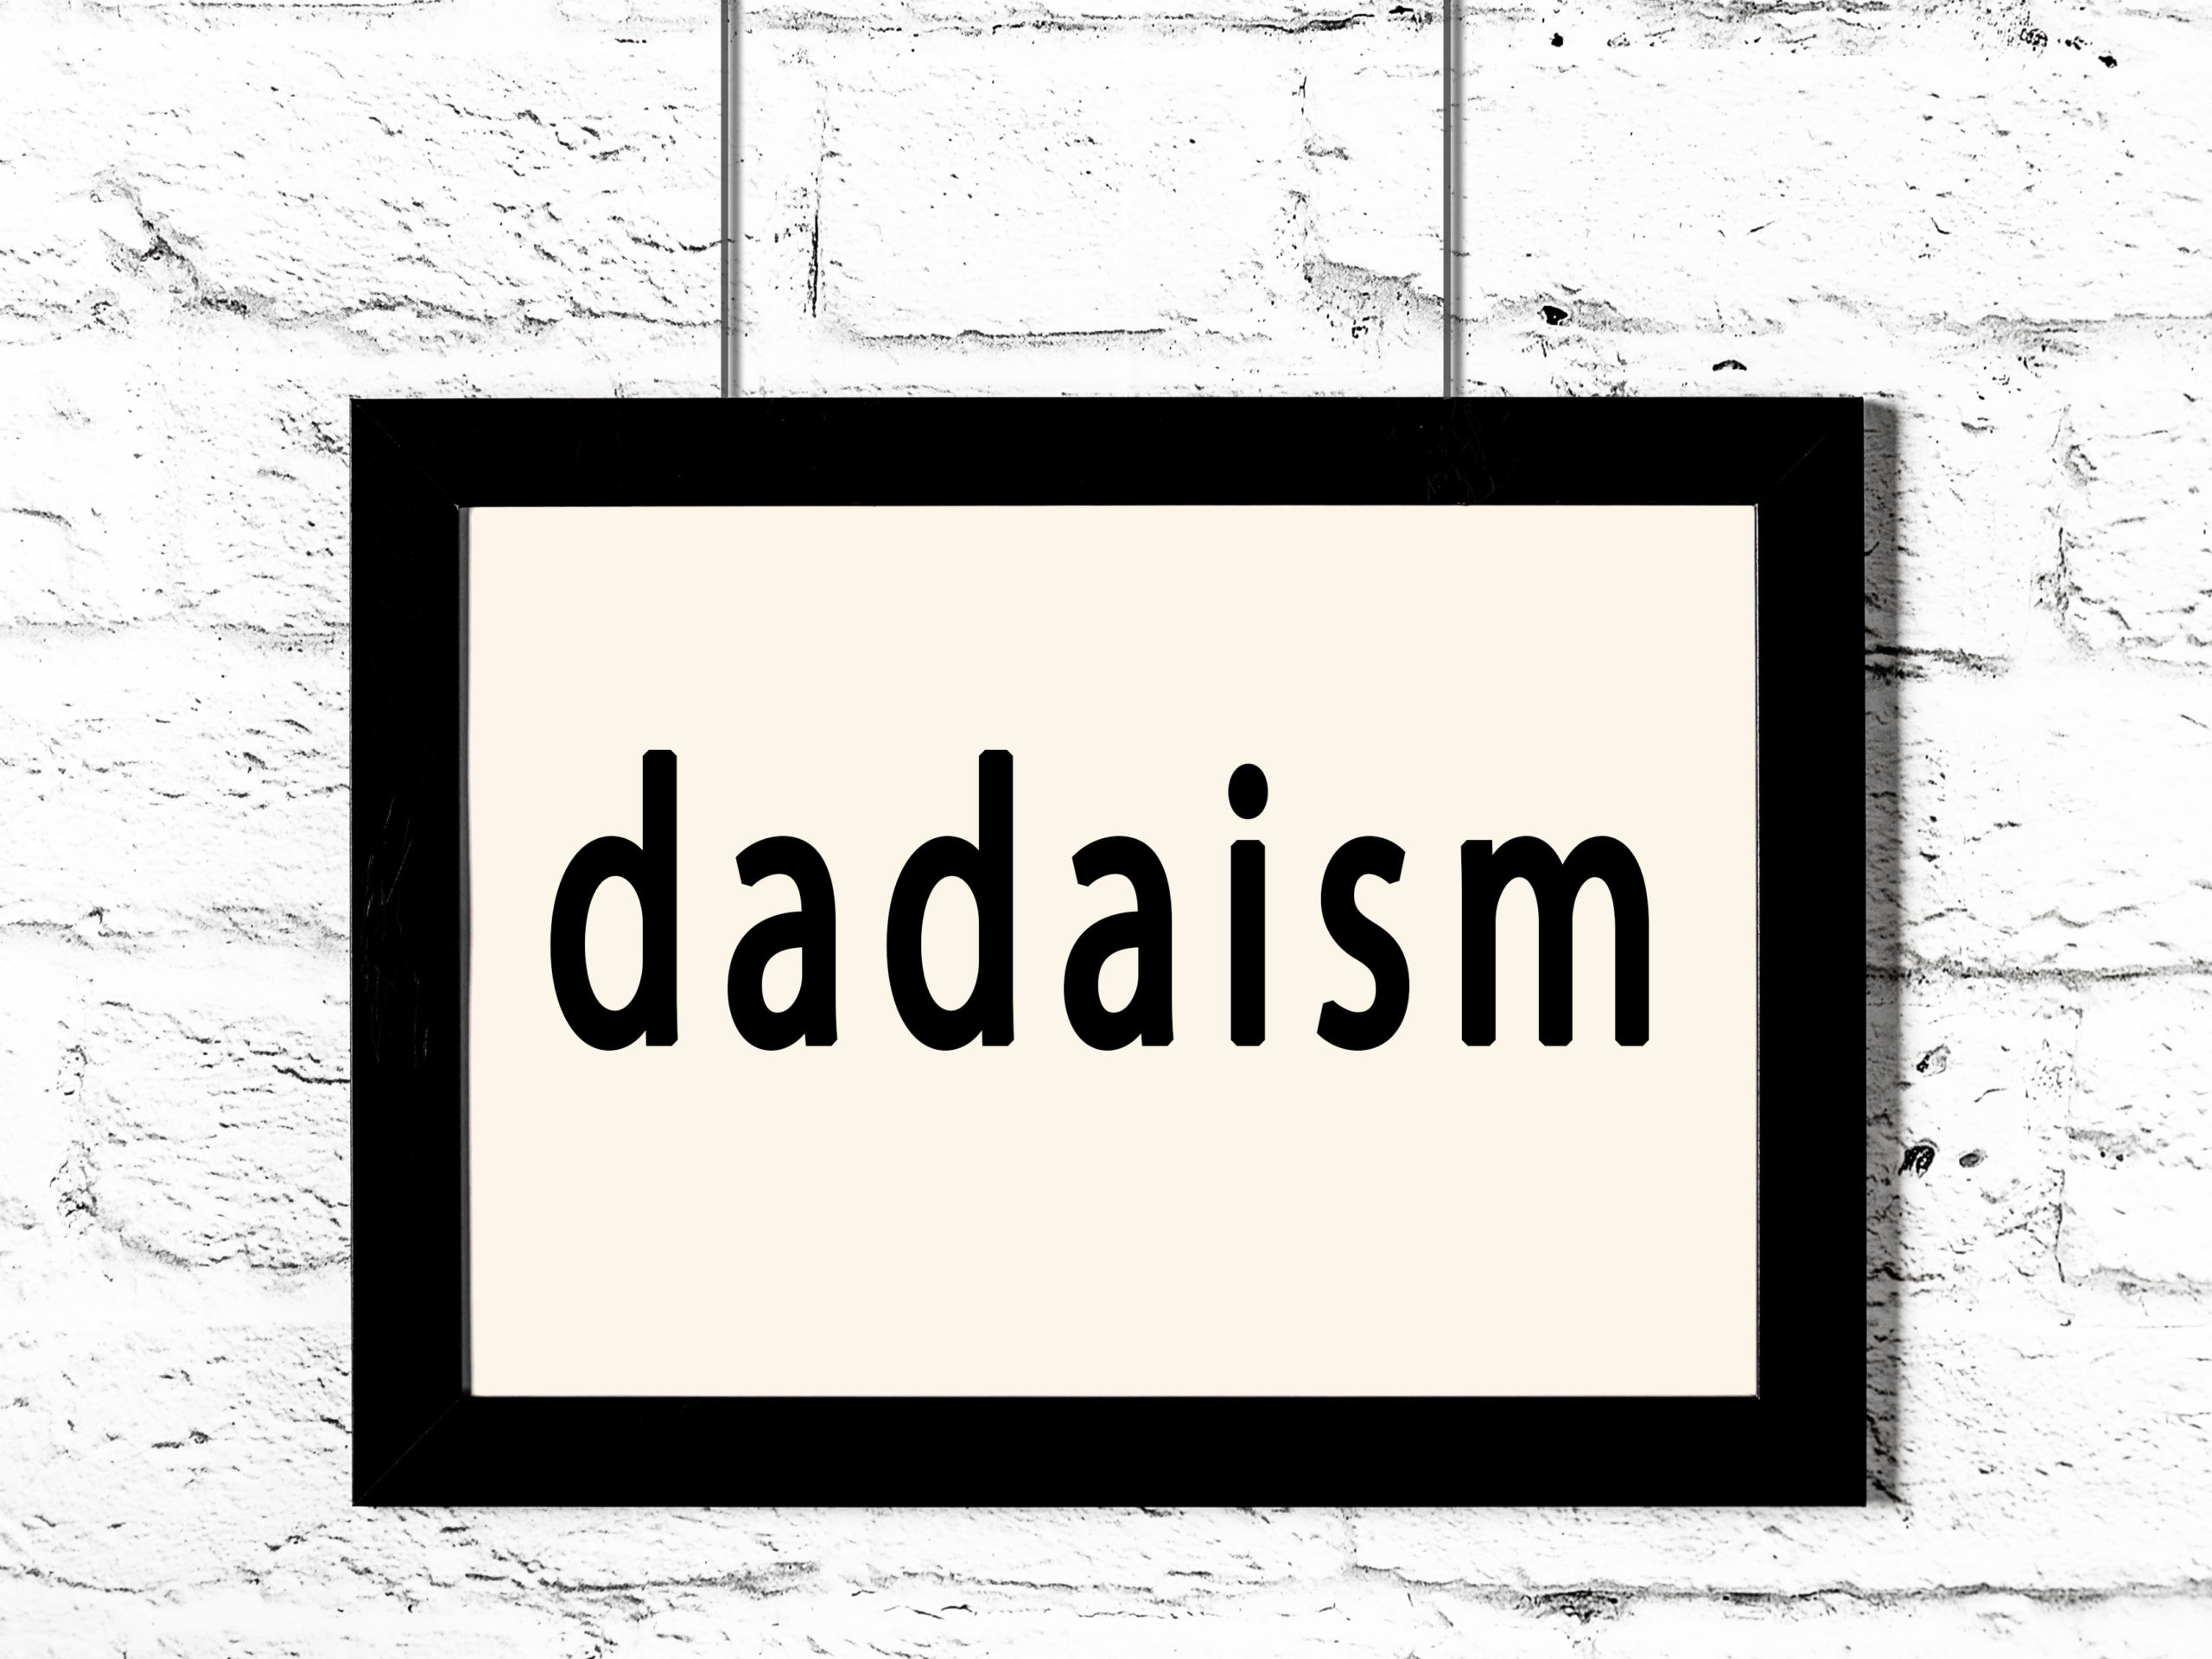 Black frame hanging on white brick wall with word dadaism.